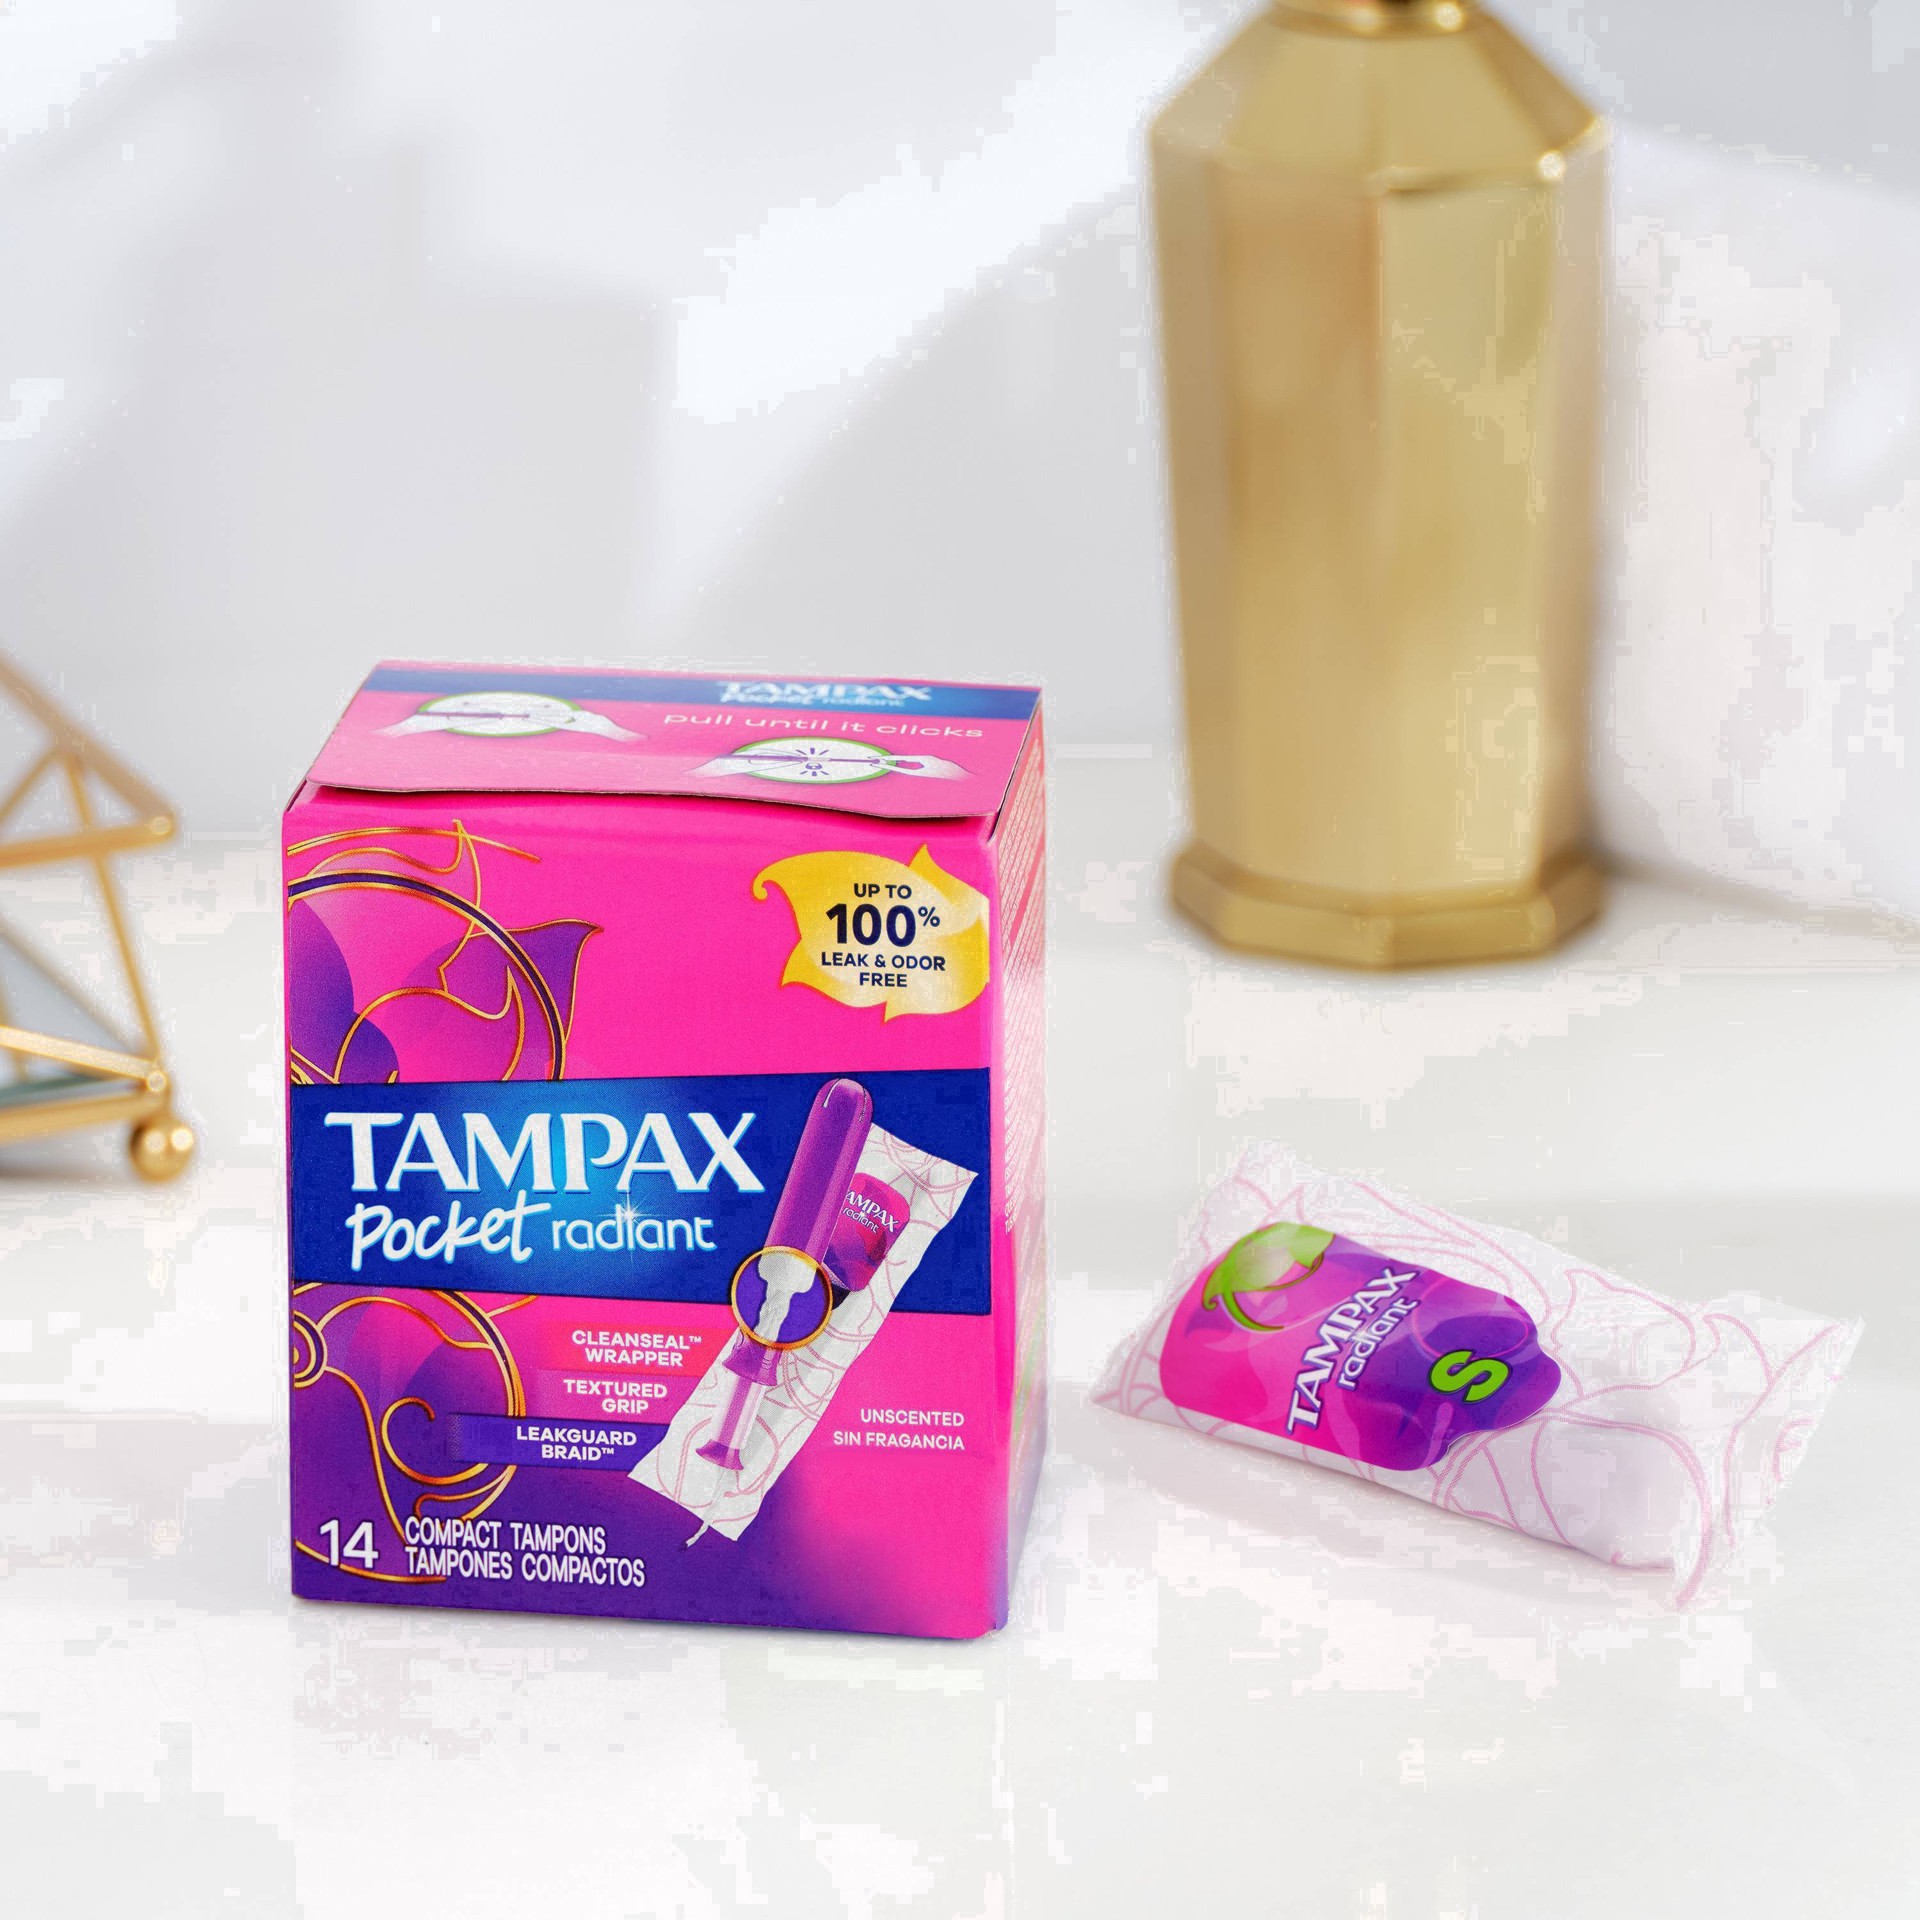 slide 12 of 94, Tampax Pocket Radiant Compact Plastic Tampons, With LeakGuard Braid, Super Absorbency, Unscented, 28 Count, 28 ct